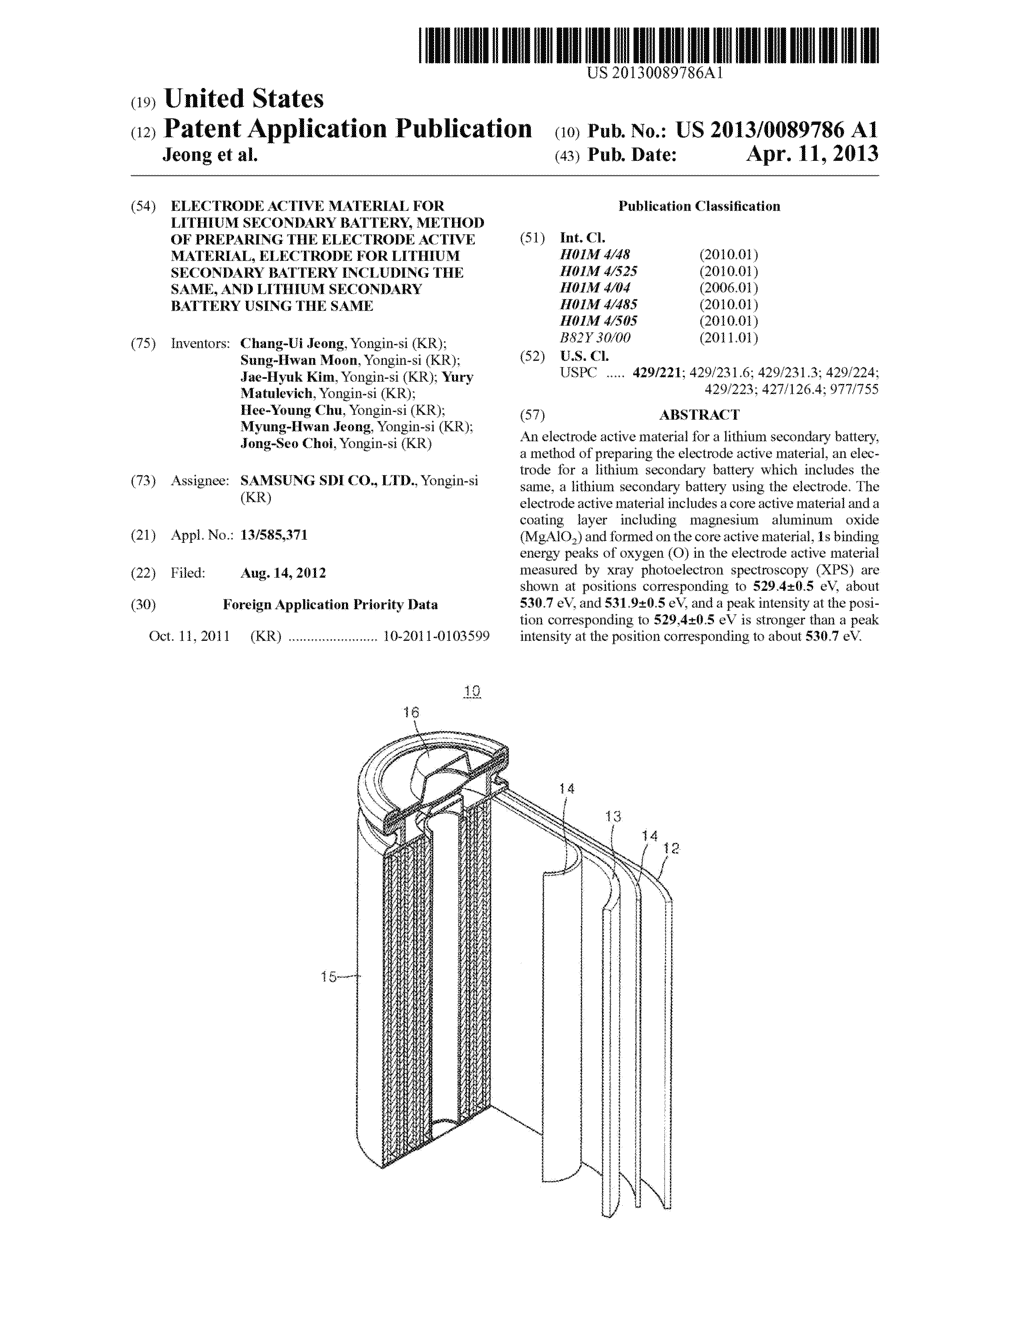 ELECTRODE ACTIVE MATERIAL FOR LITHIUM SECONDARY BATTERY, METHOD OF     PREPARING THE ELECTRODE ACTIVE MATERIAL, ELECTRODE FOR LITHIUM SECONDARY     BATTERY INCLUDING THE SAME, AND LITHIUM SECONDARY BATTERY USING THE SAME - diagram, schematic, and image 01